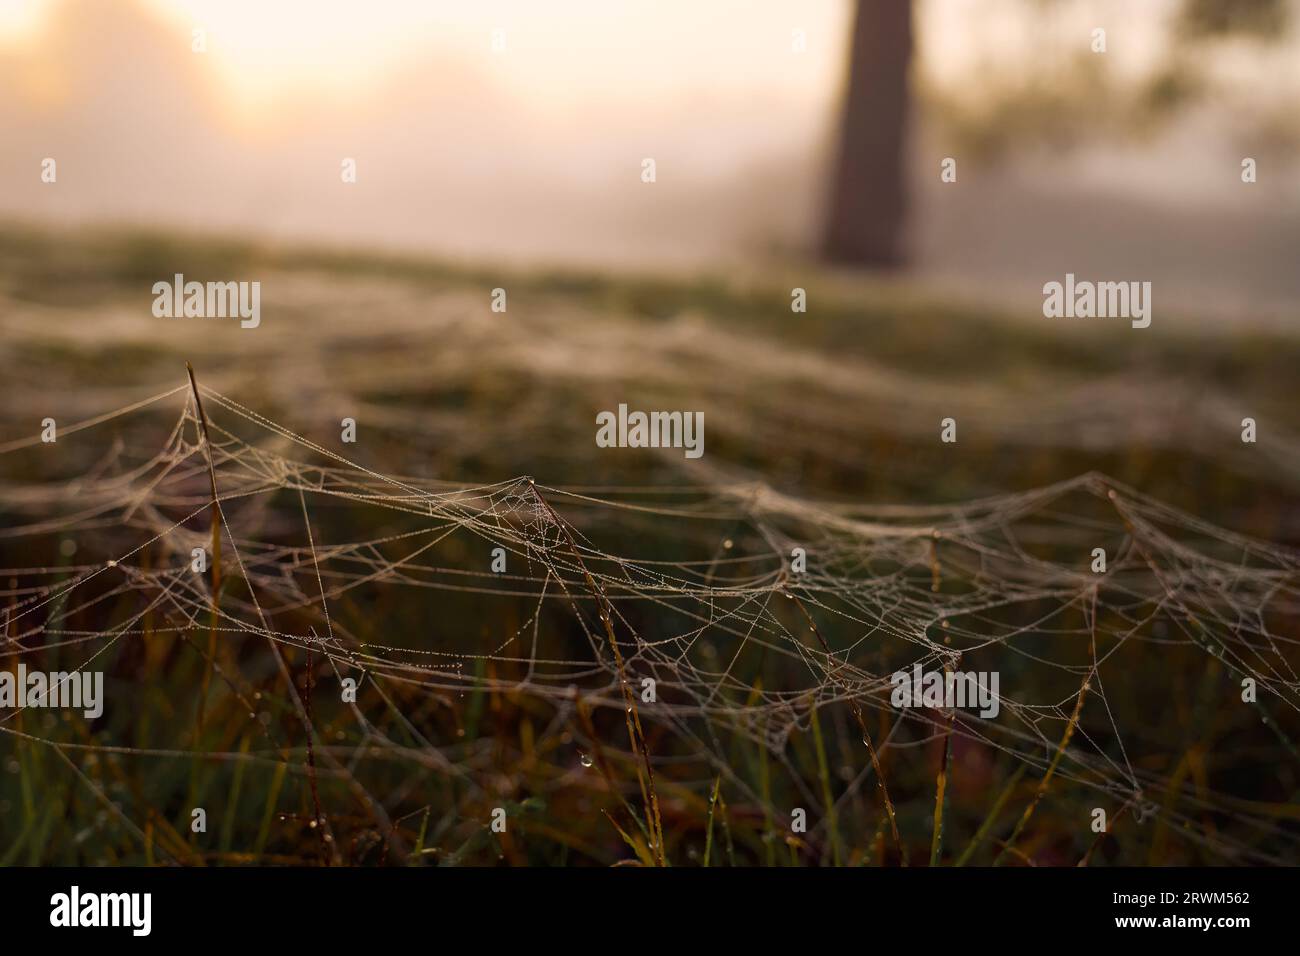 Autumn spider web on the grass with drops of dew. Stock Photo